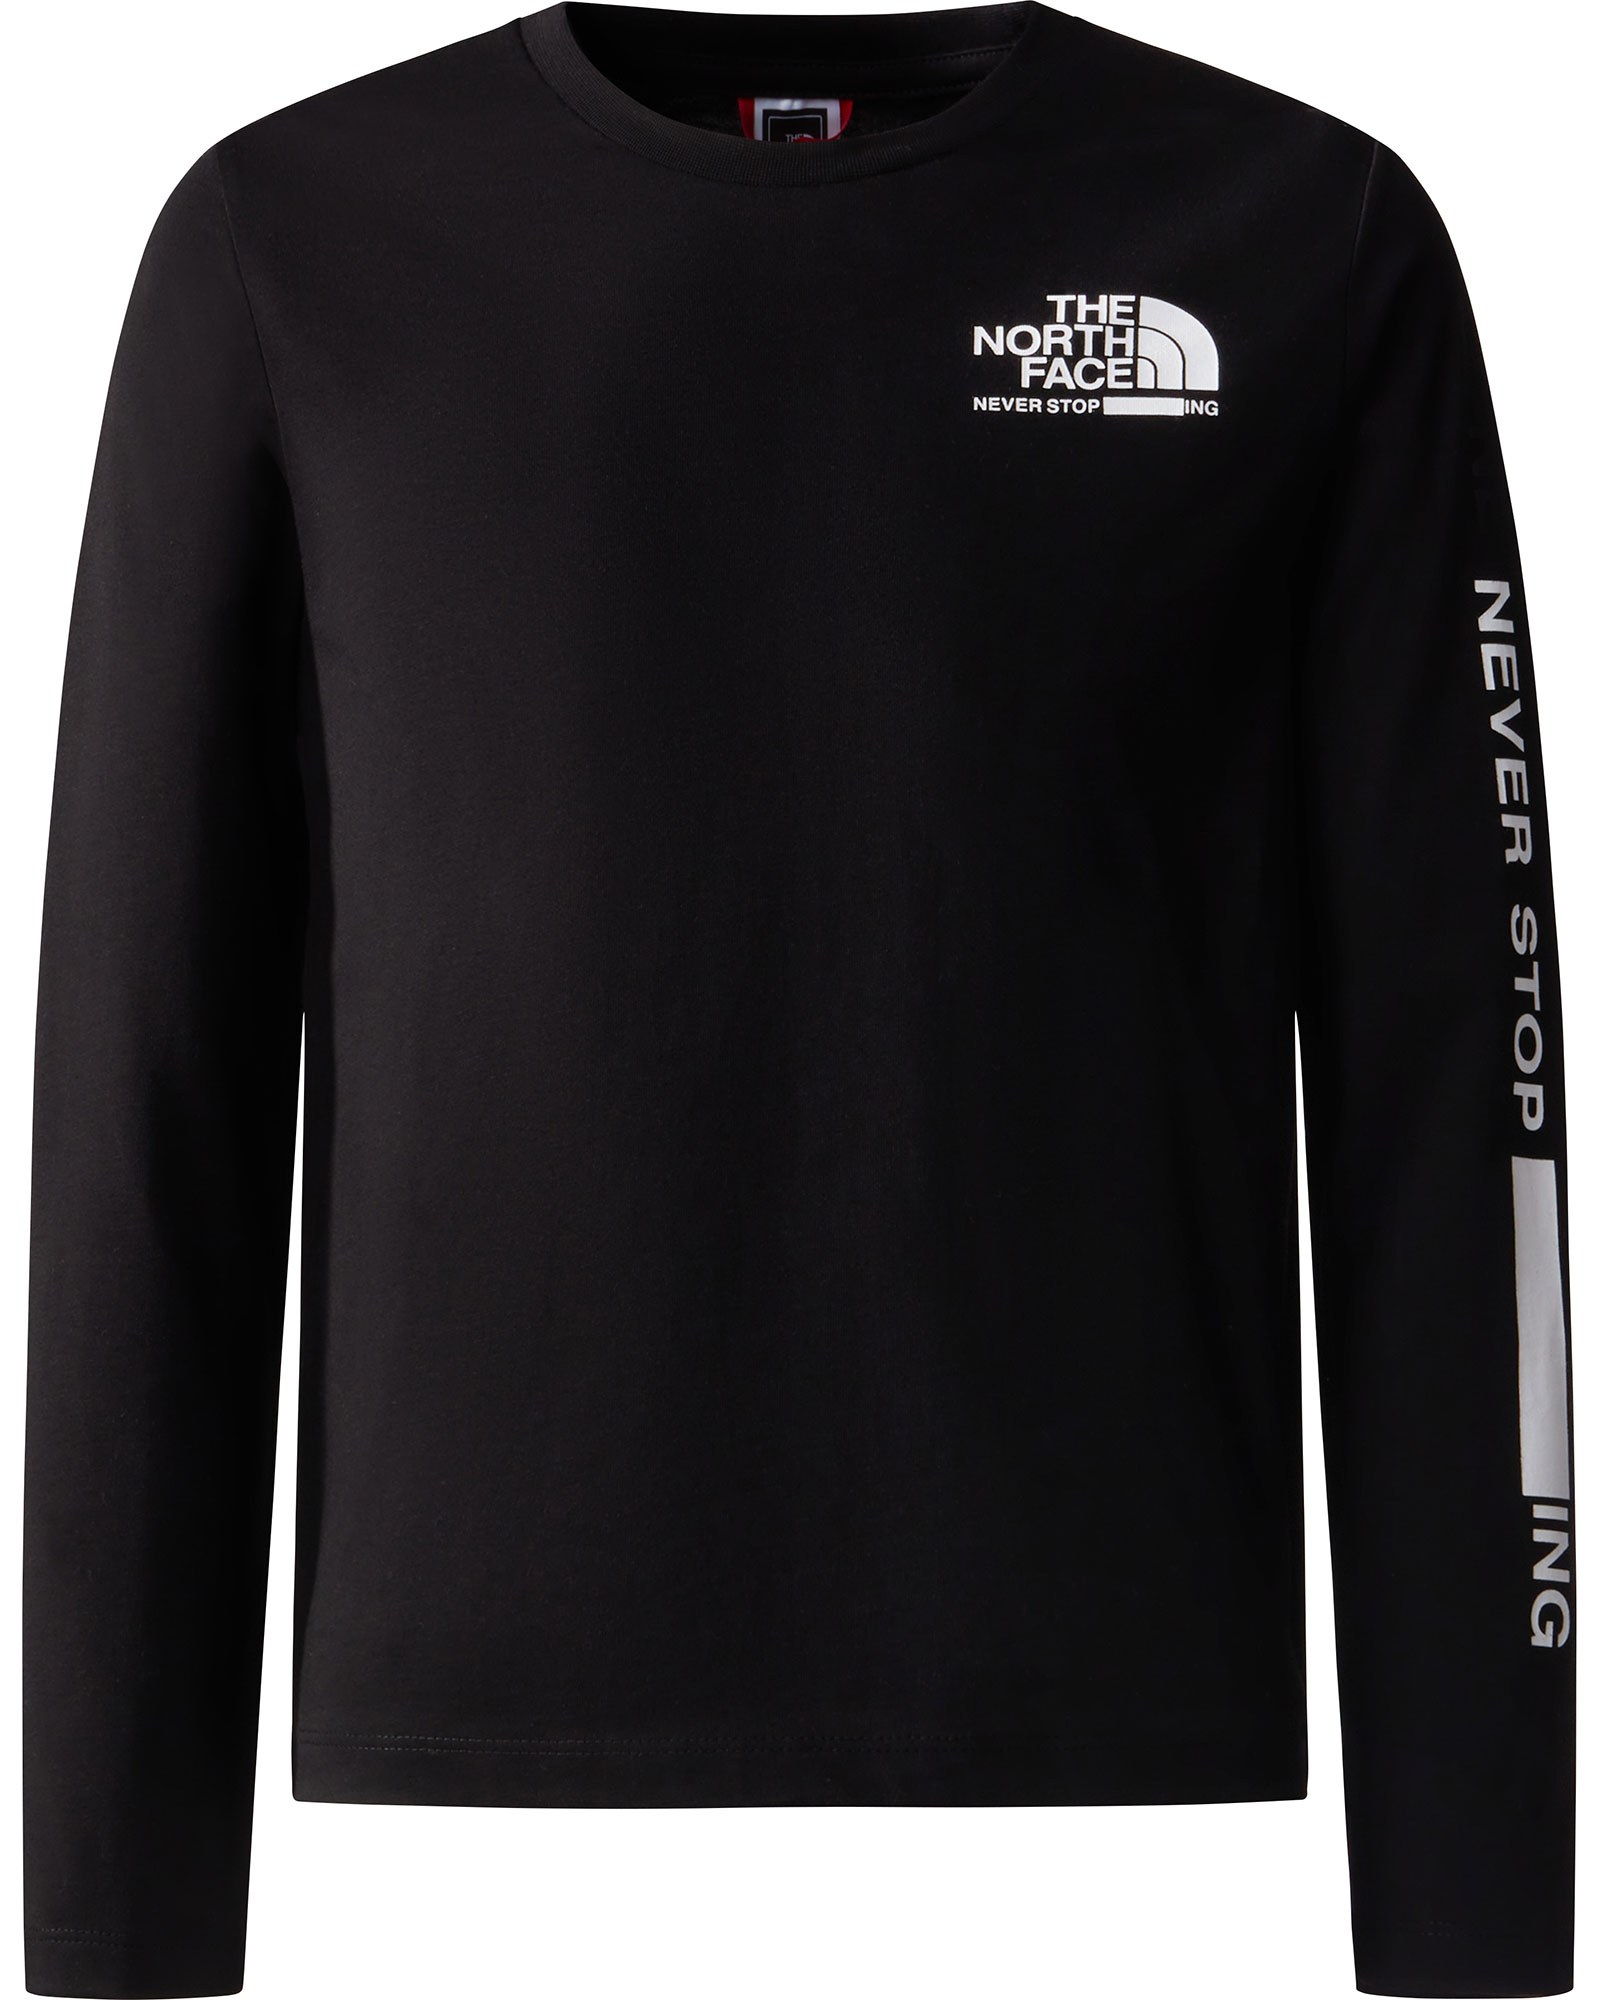 The North Face Youth Graphic Long Sleeved T Shirt 2 - TNF Black L